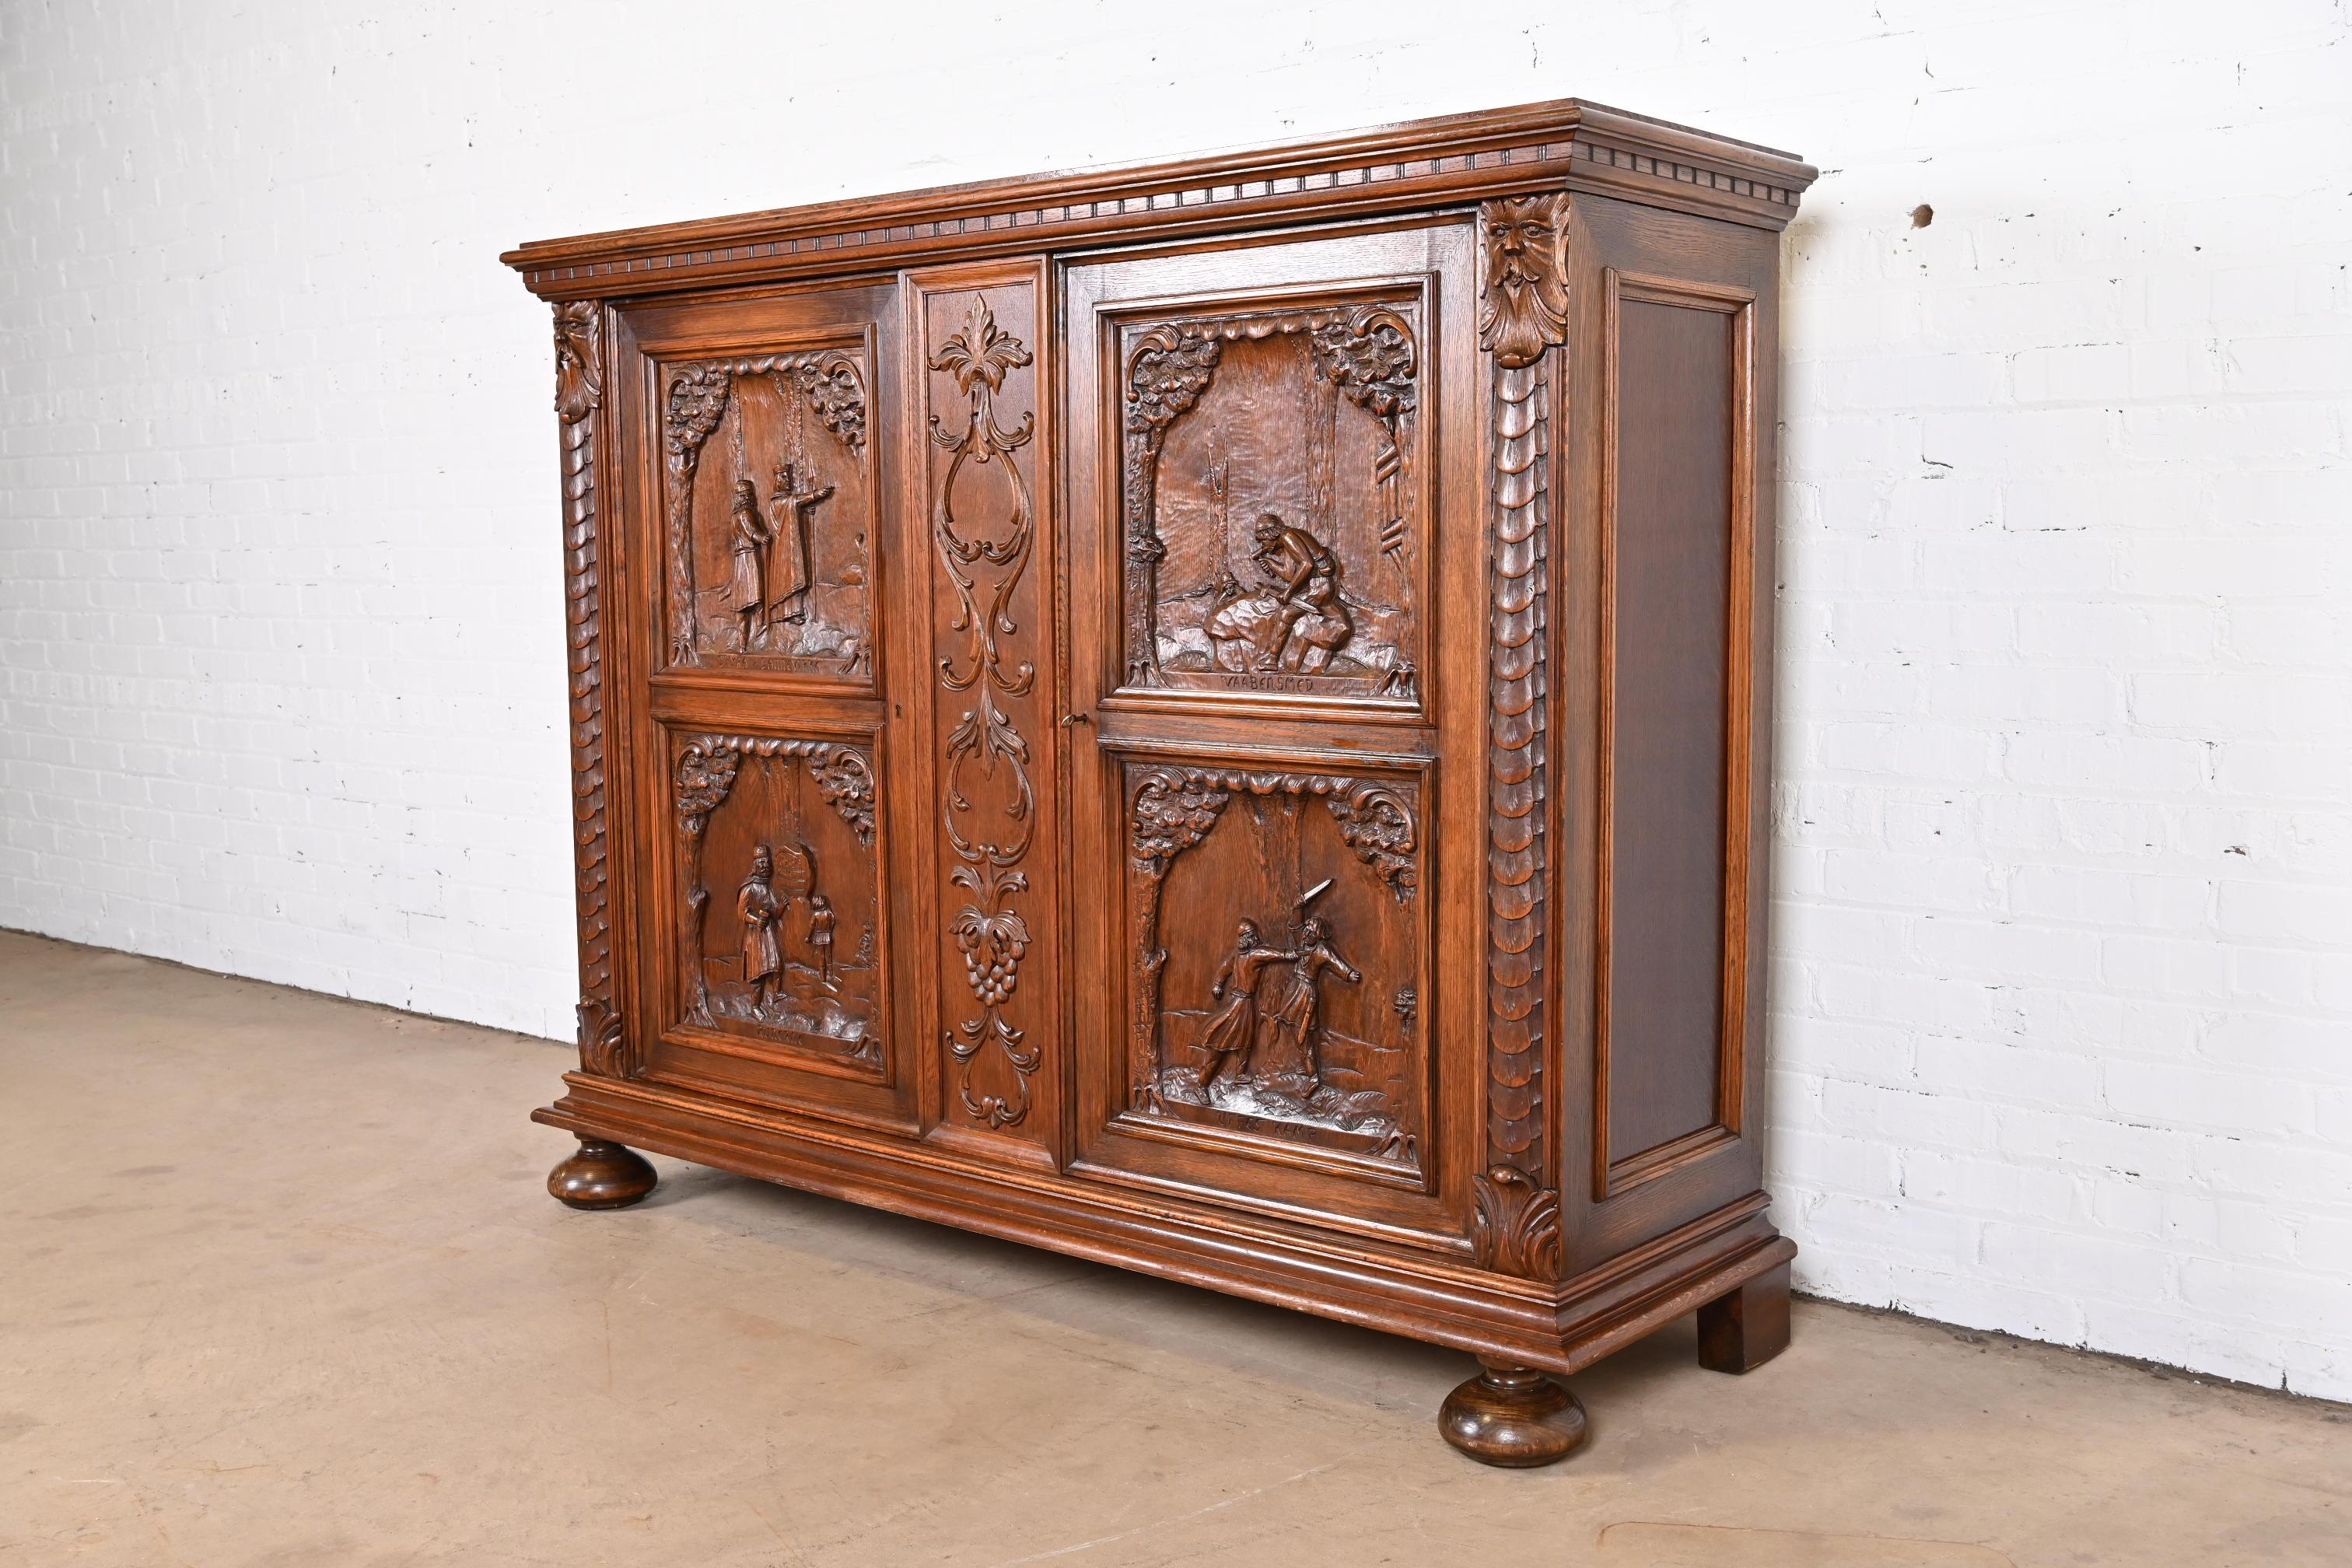 A gorgeous antique Scandinavian Renaissance Revival sideboard or bar cabinet.

Denmark, circa late 19th century

Ornate carved oak, with panels depicting various scenes, Old Man of the North carved faces, and the case raised on bun feet. Cabinet